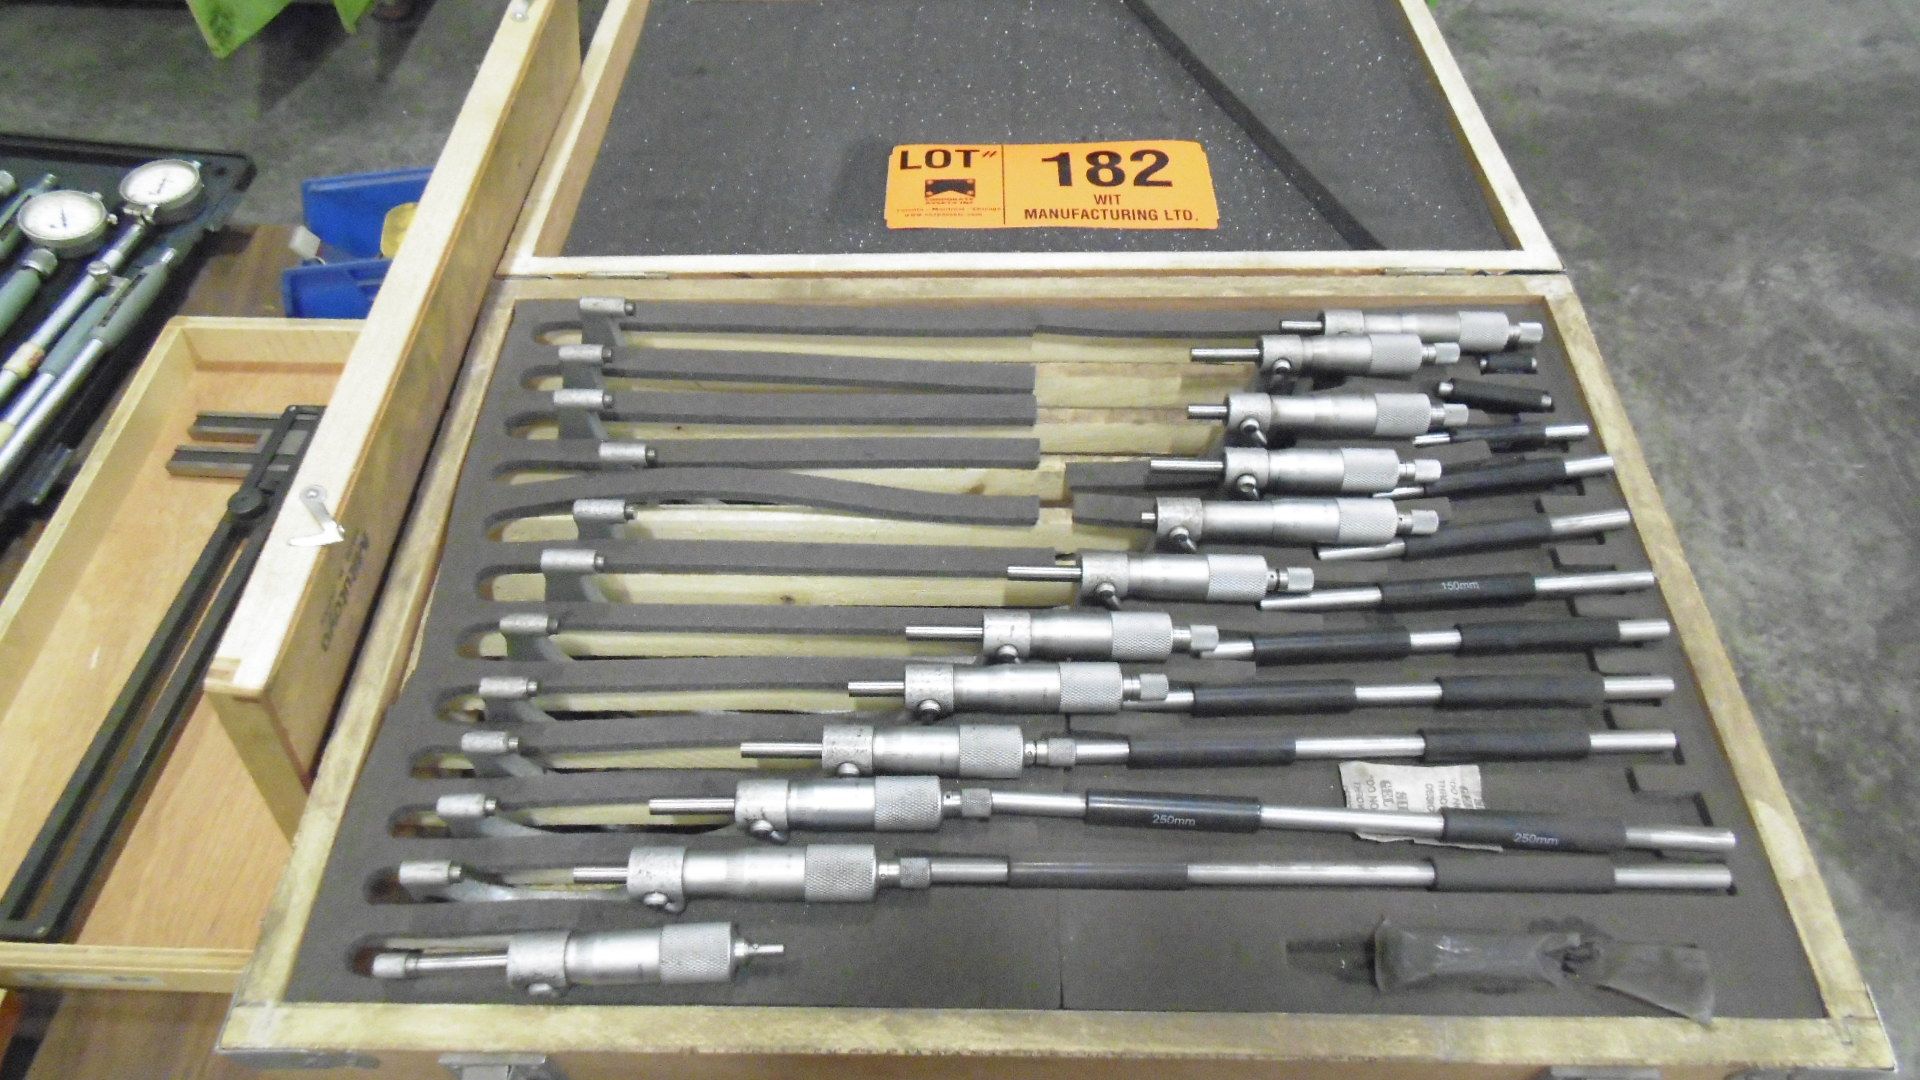 STM 0"- 12" OUTSIDE MICROMETER SET (LOCATED IN CAMBRIDGE)